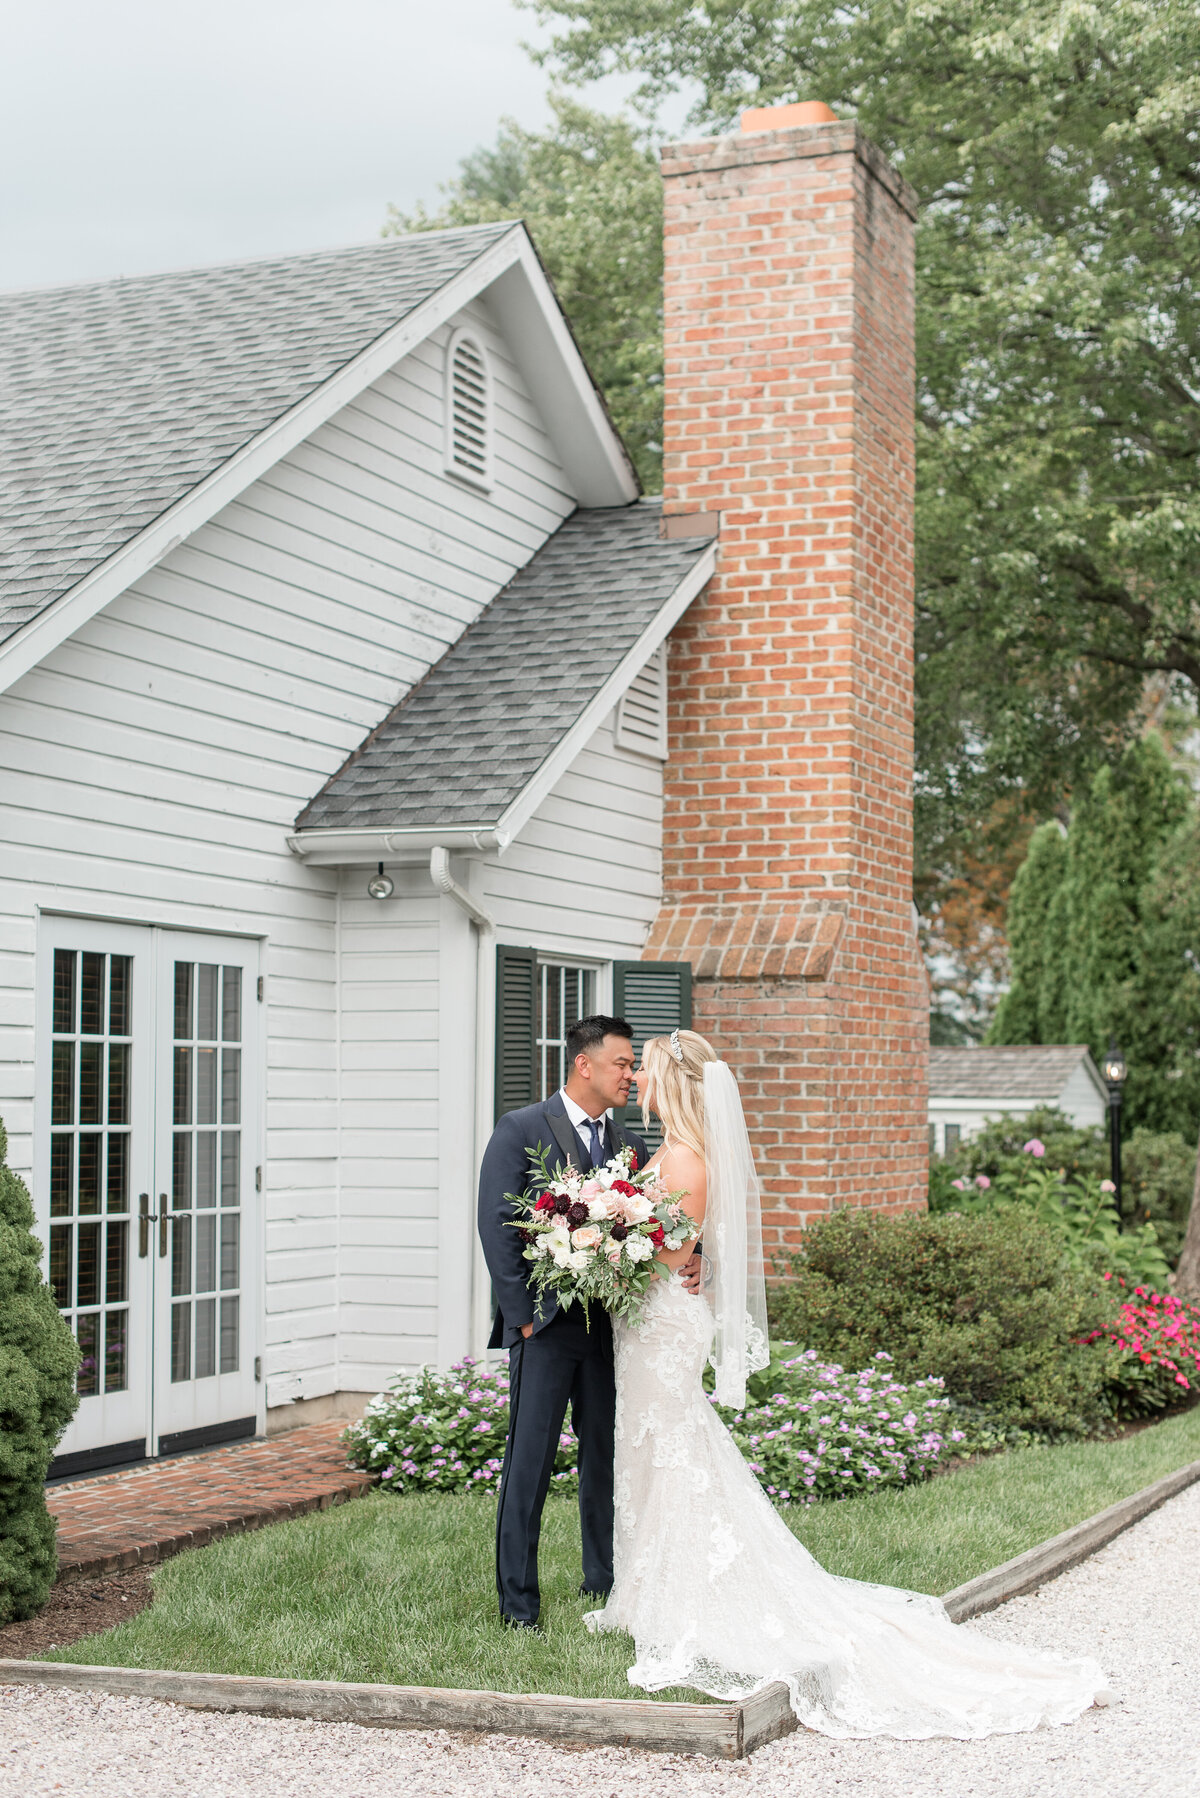 Bride and Groom smiling at each other in front of white house with brick chimney